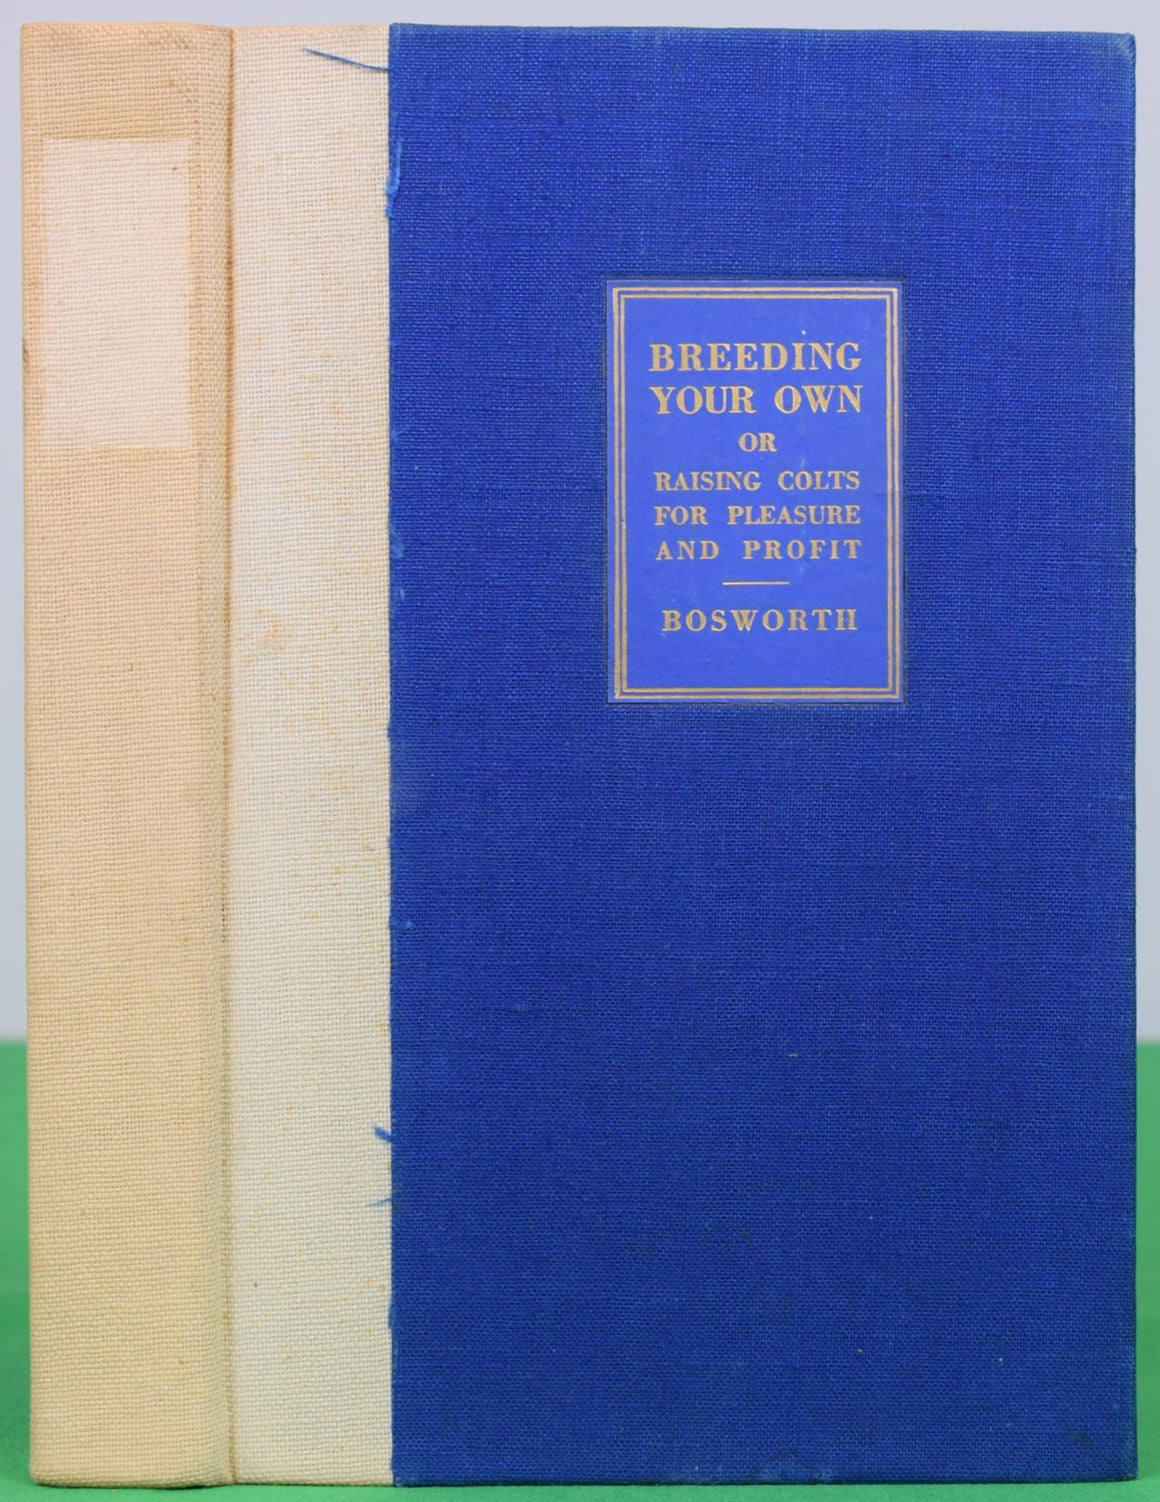 "Breeding Your Own" 1939 BOSWORTH, Clarence E.